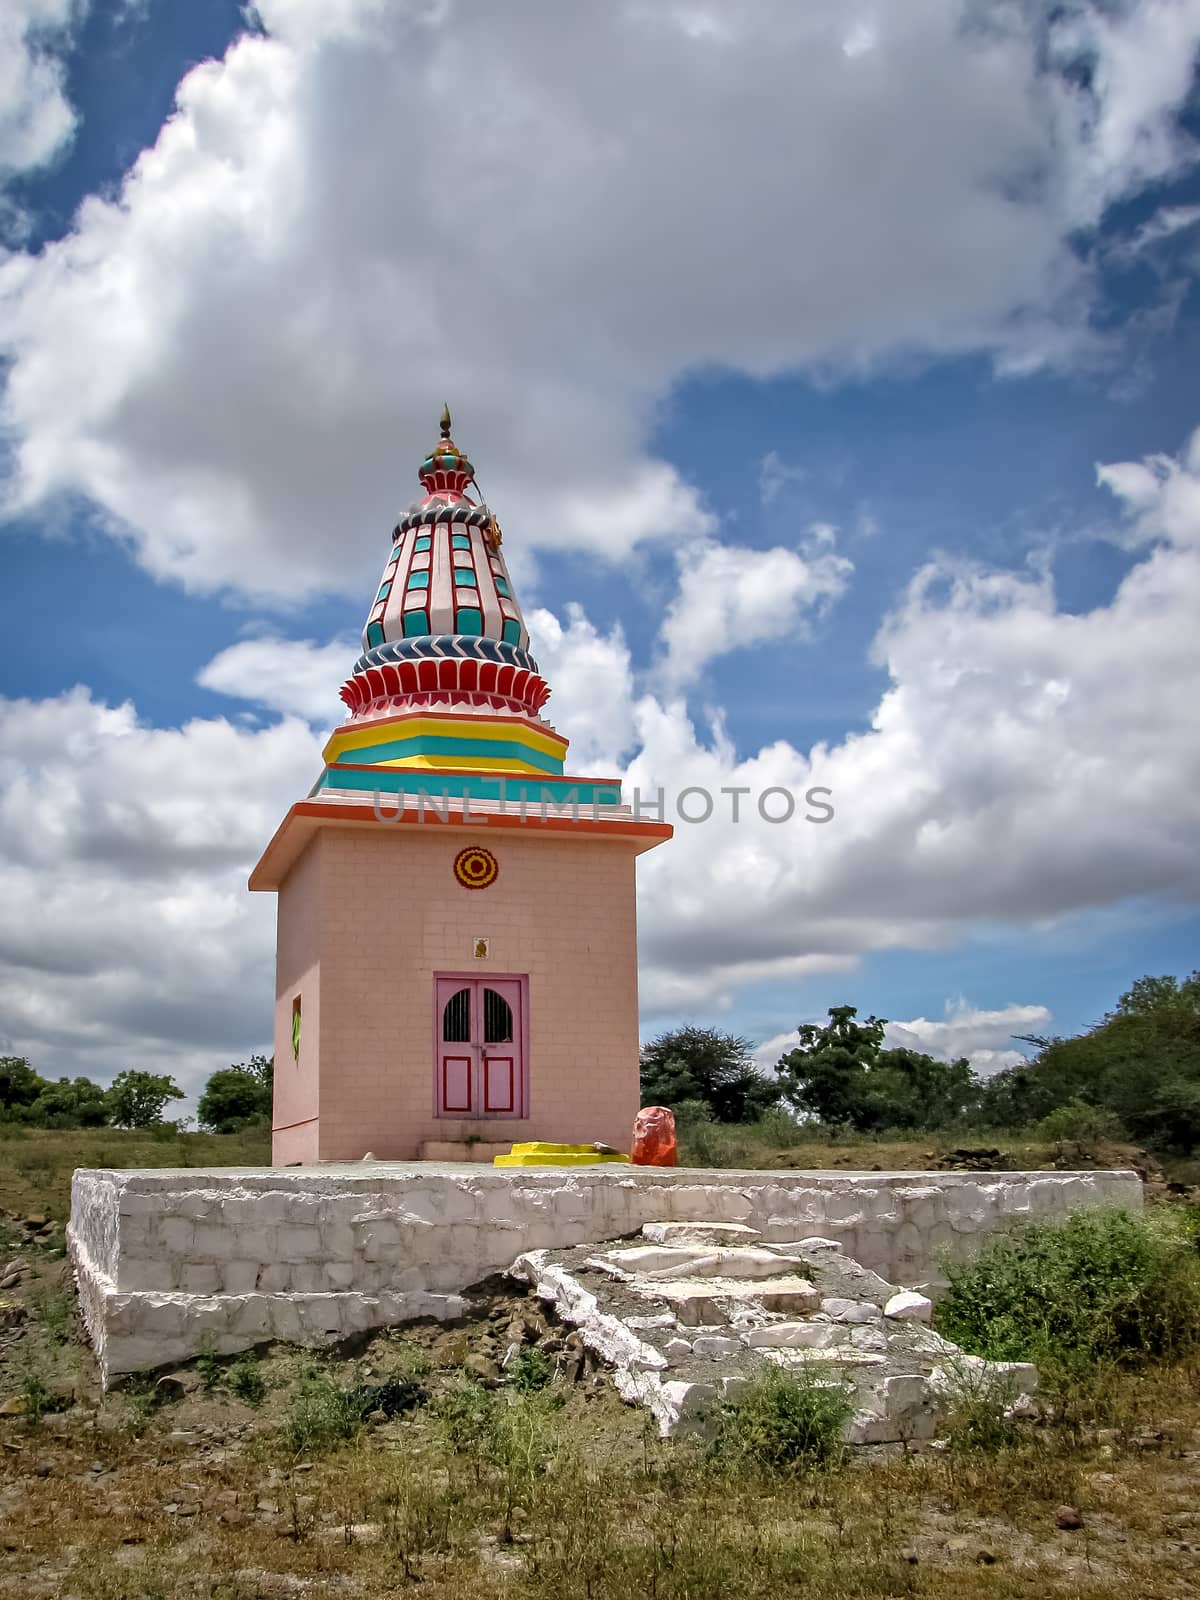 On the background of nice clouds, photo of Colorful isolated image of a temple in the outskirts of village.